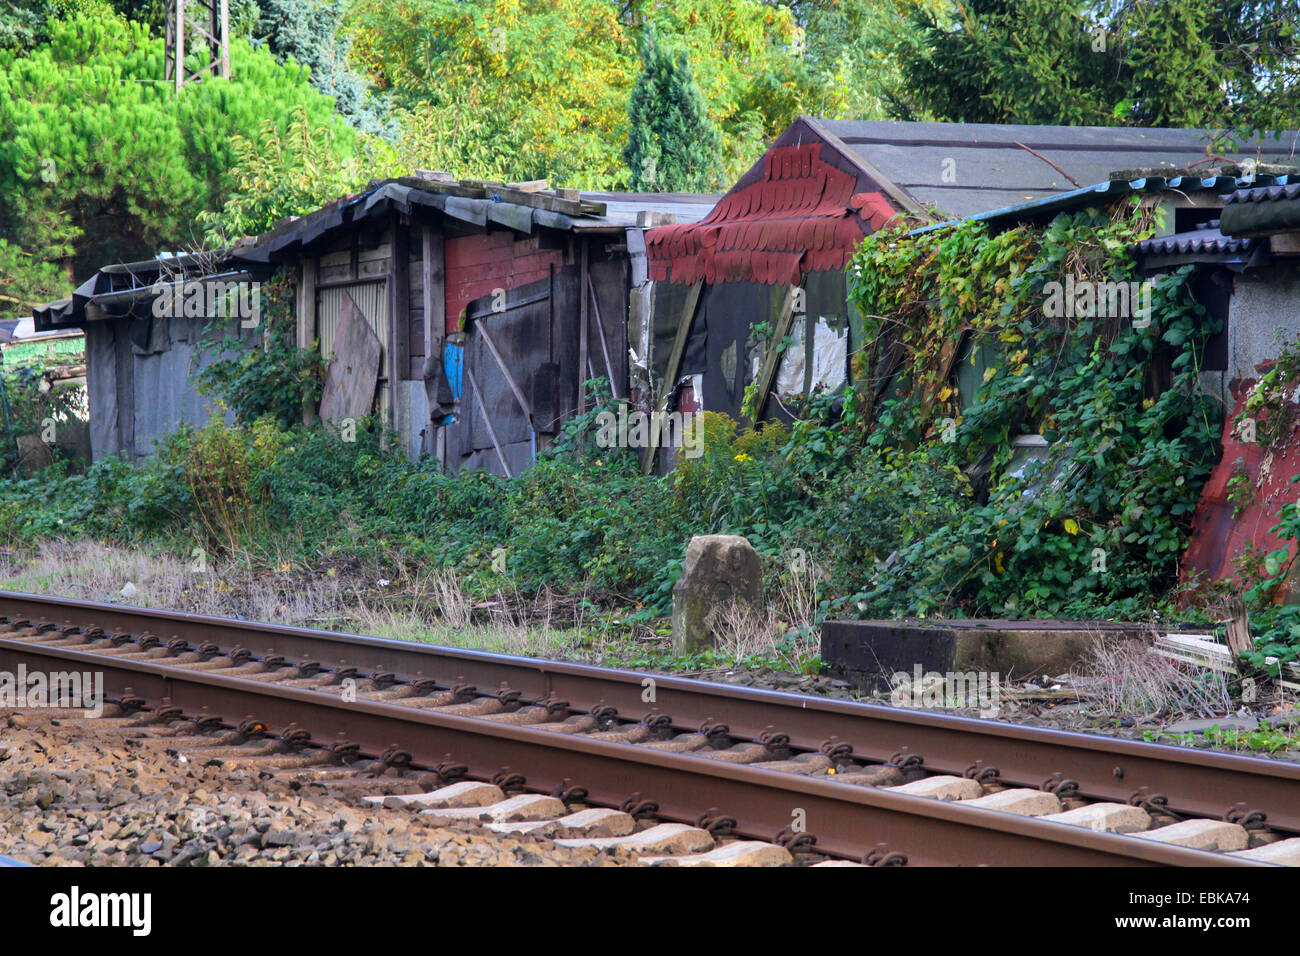 decaying huts of an allotment garden right beside a railtrack, Germany Stock Photo